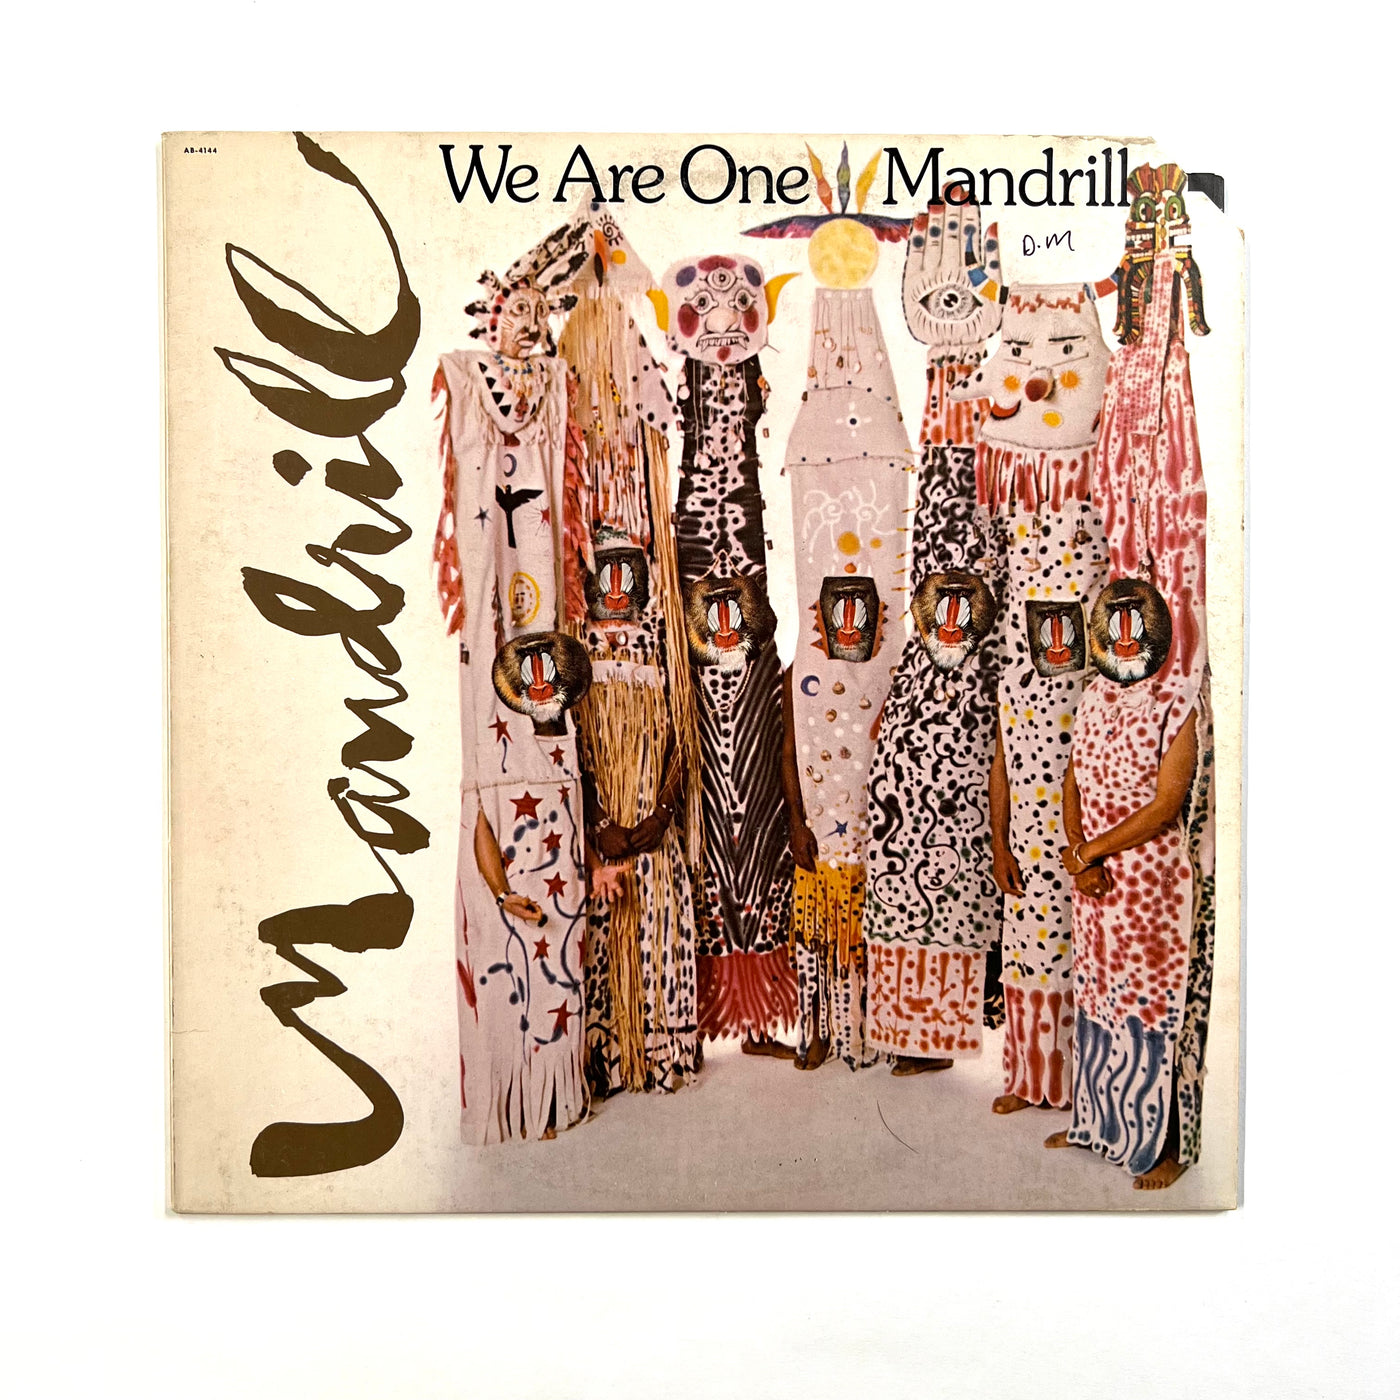 Mandrill - We Are One